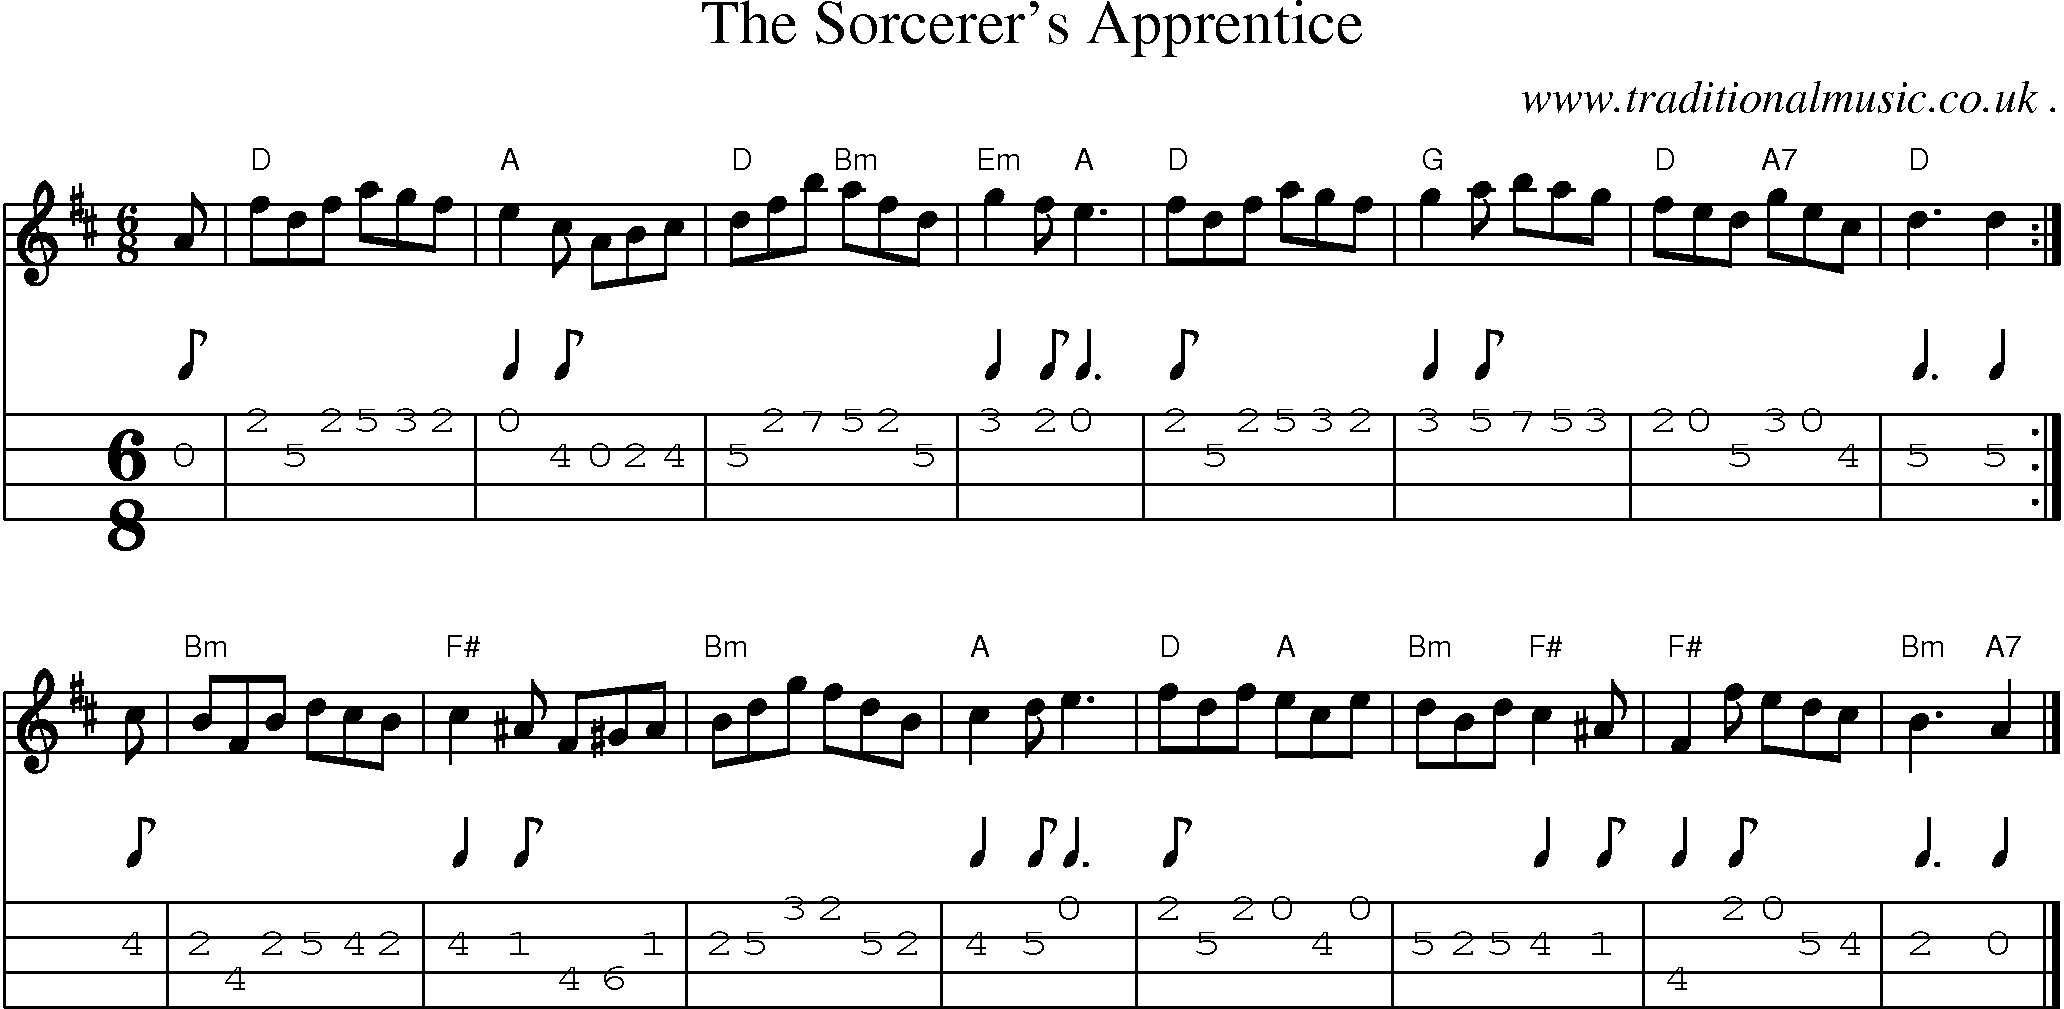 Sheet-music  score, Chords and Mandolin Tabs for The Sorcerers Apprentice